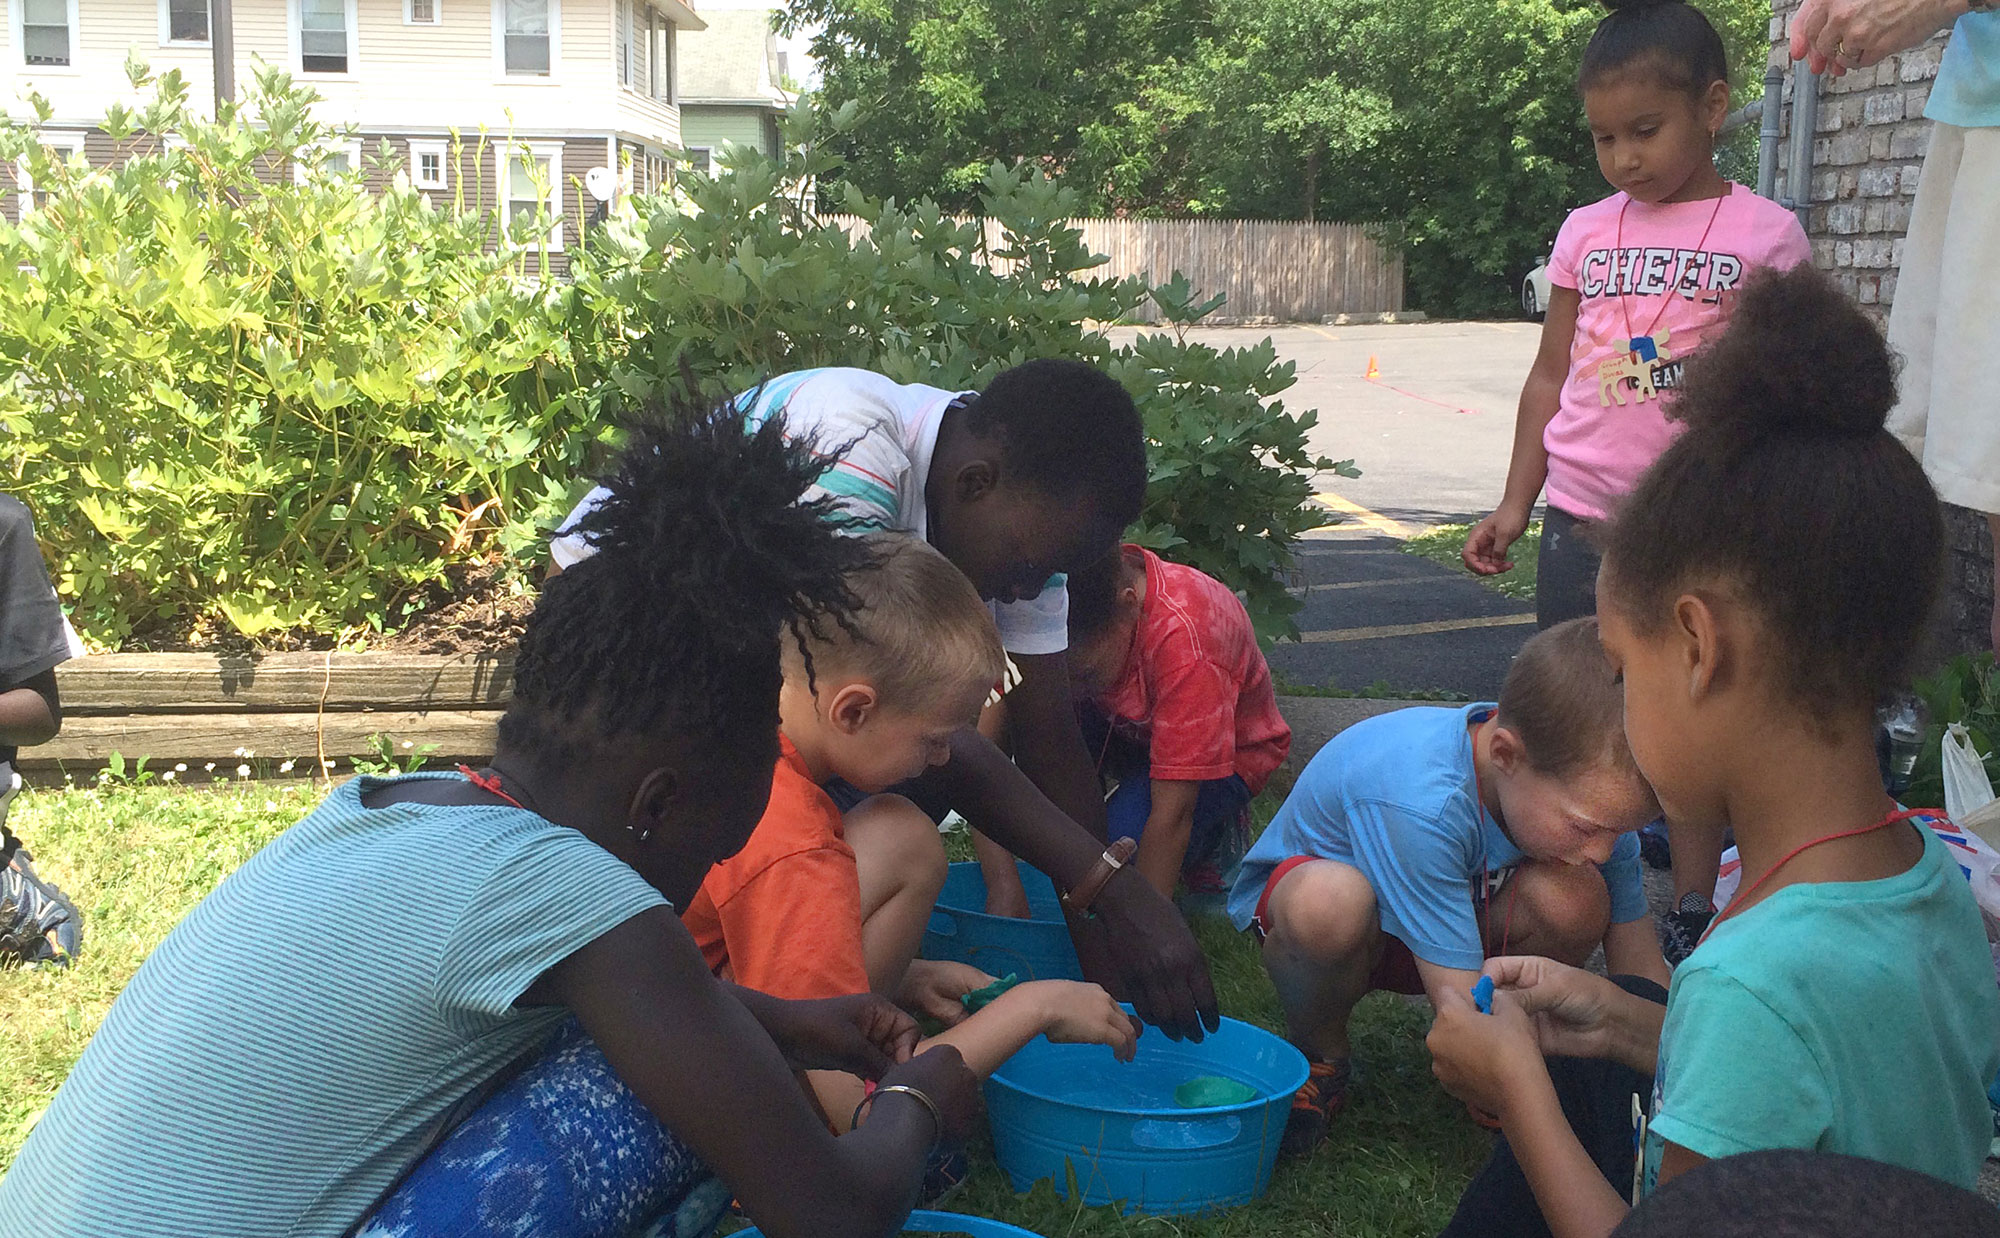 Day Camp Shares Hopes with Kids in Syracuse